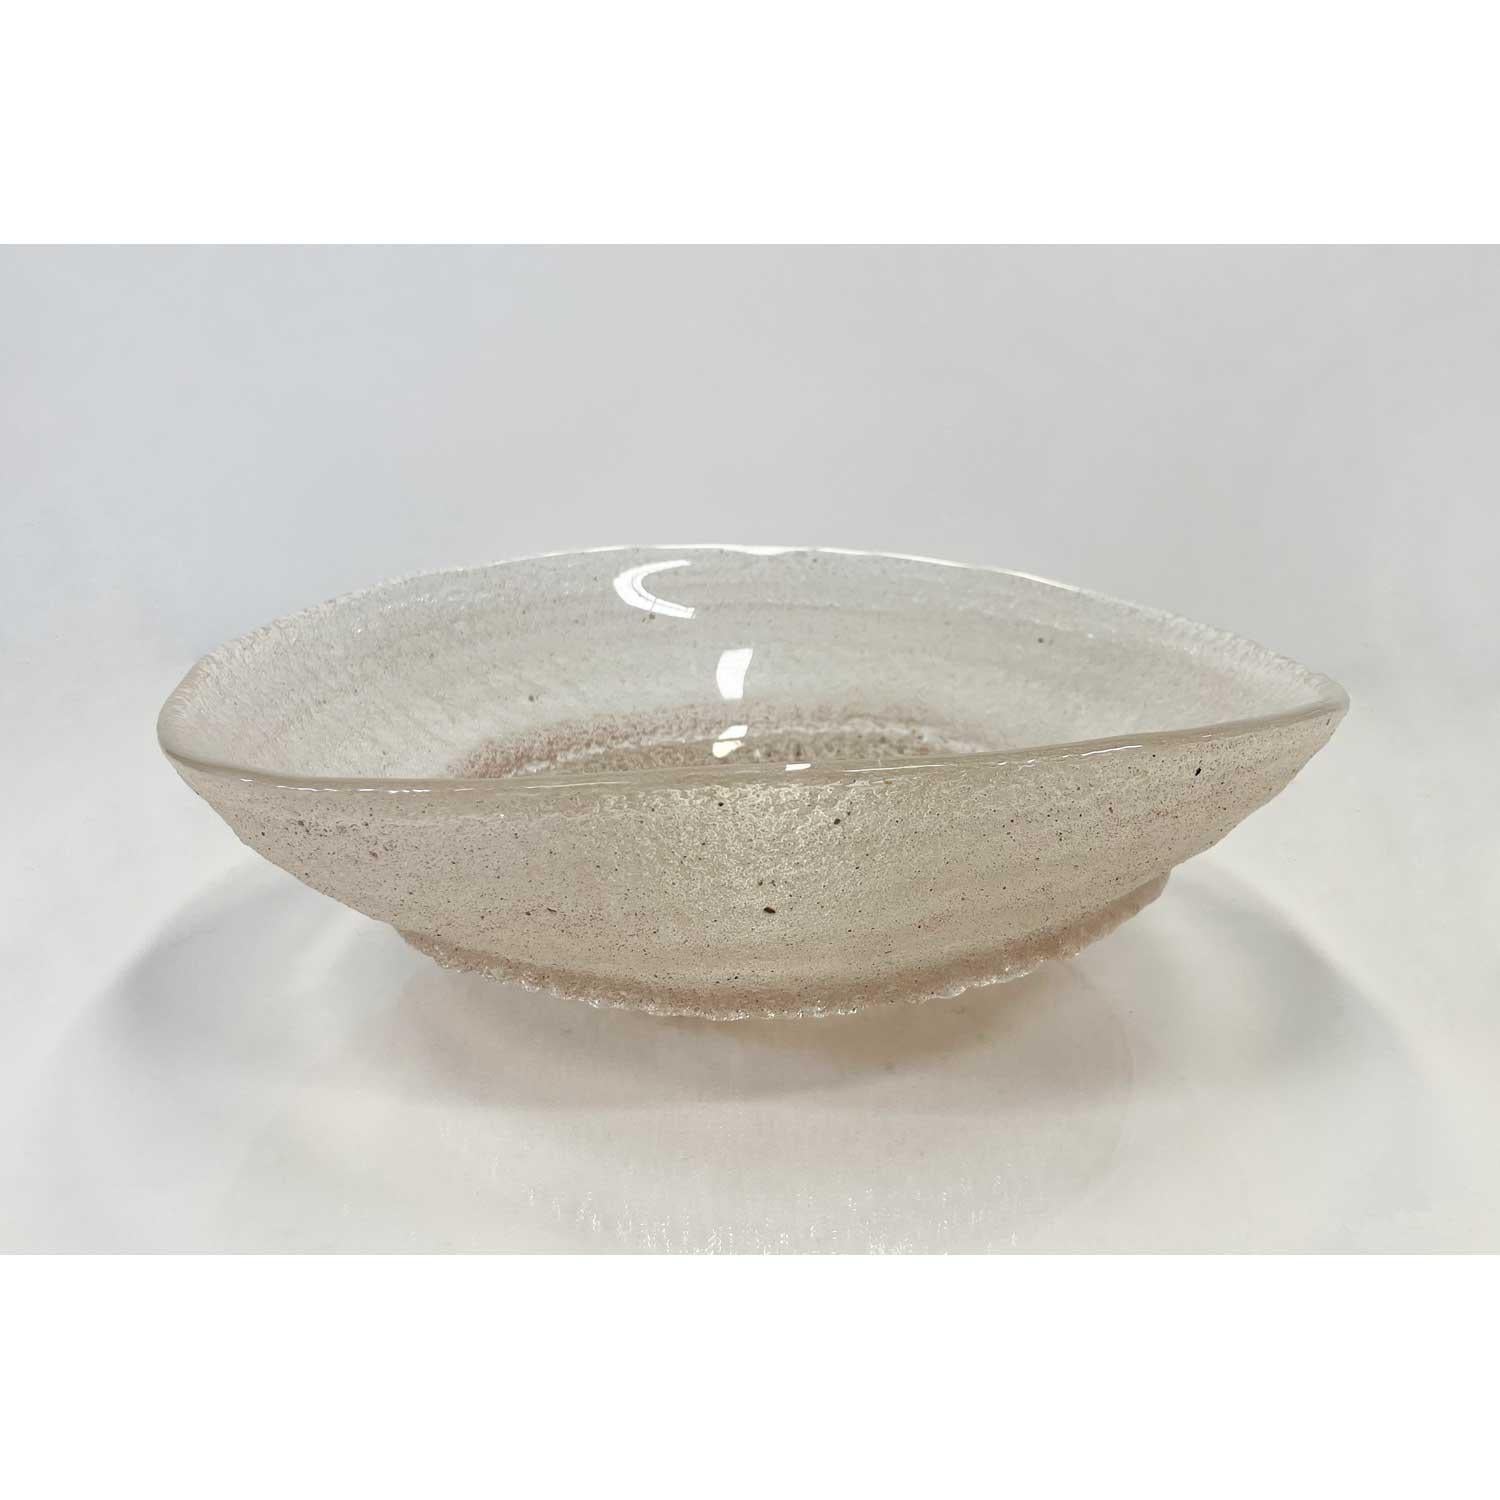 Andrew Beauchamp Abstract Sculpture - Sandcast Bowl II